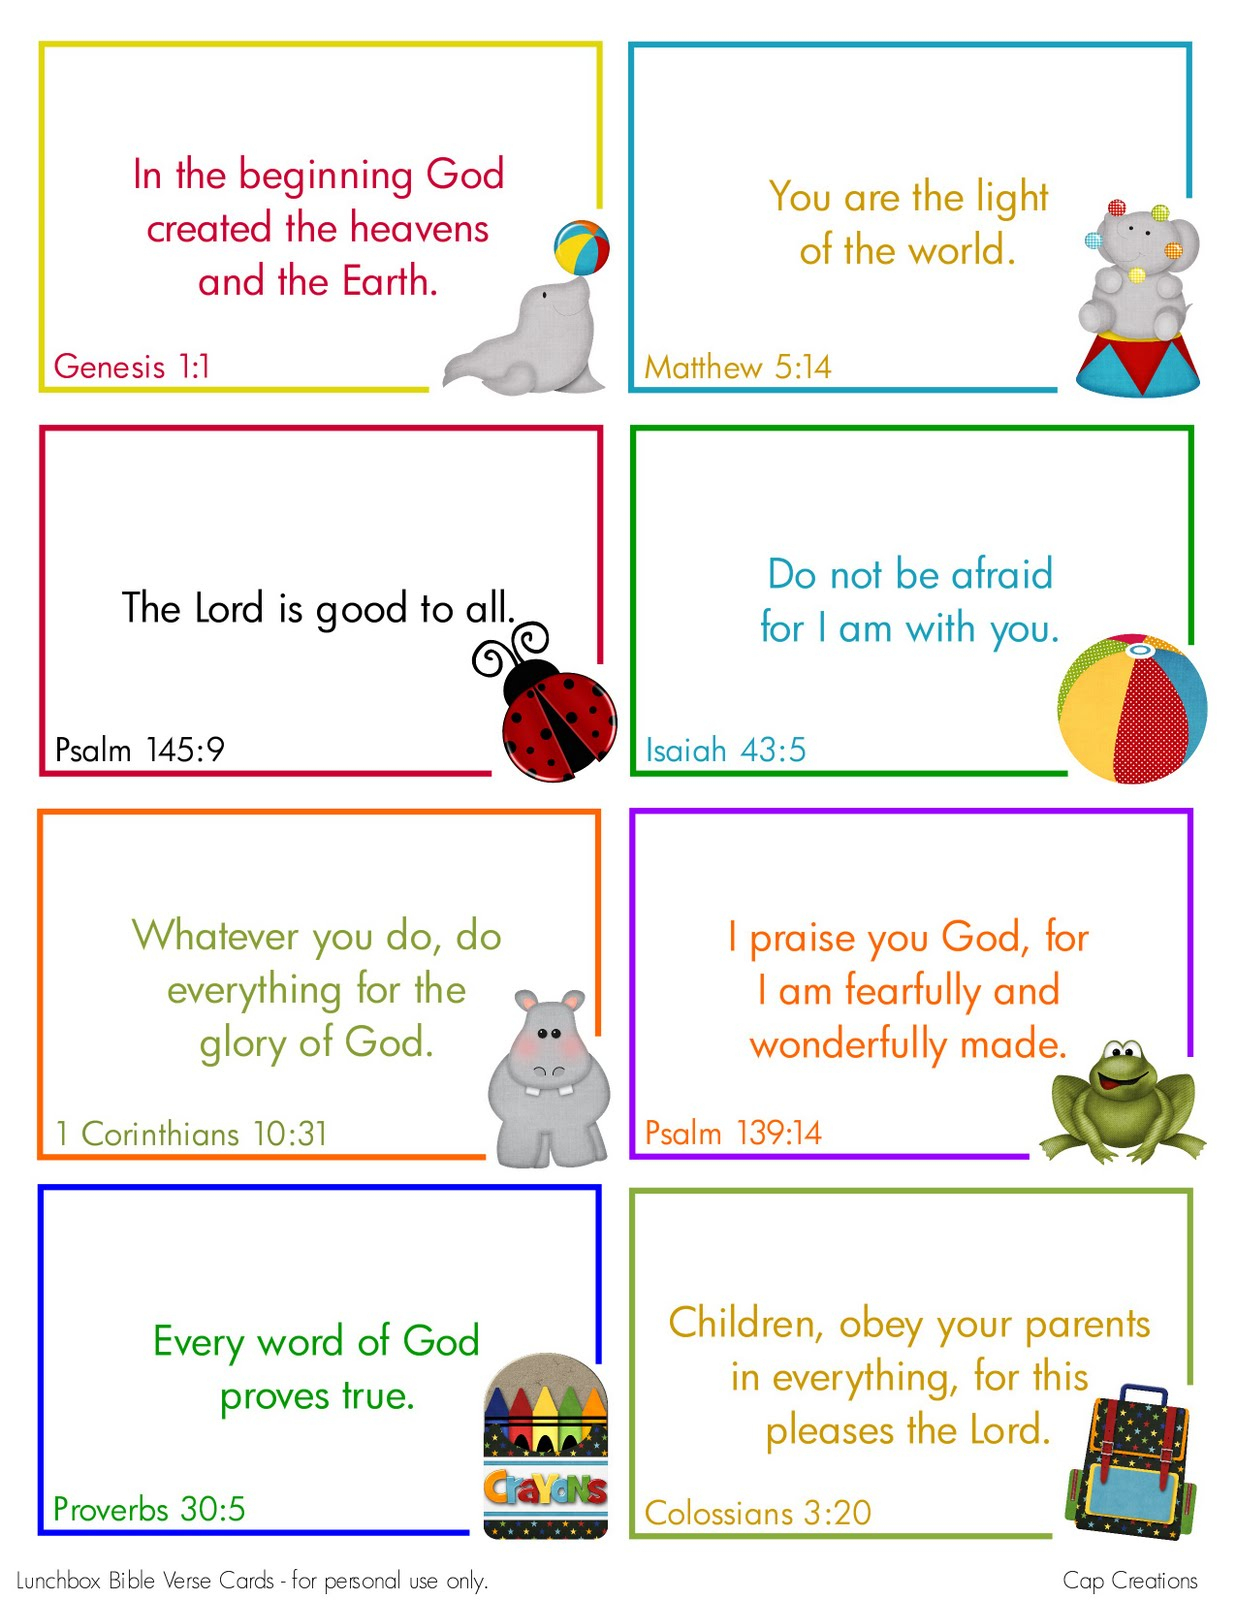 Cap Creations: Free Printable Lunchbox Bible Verse Cards - Free Printable Bible Verse Cards